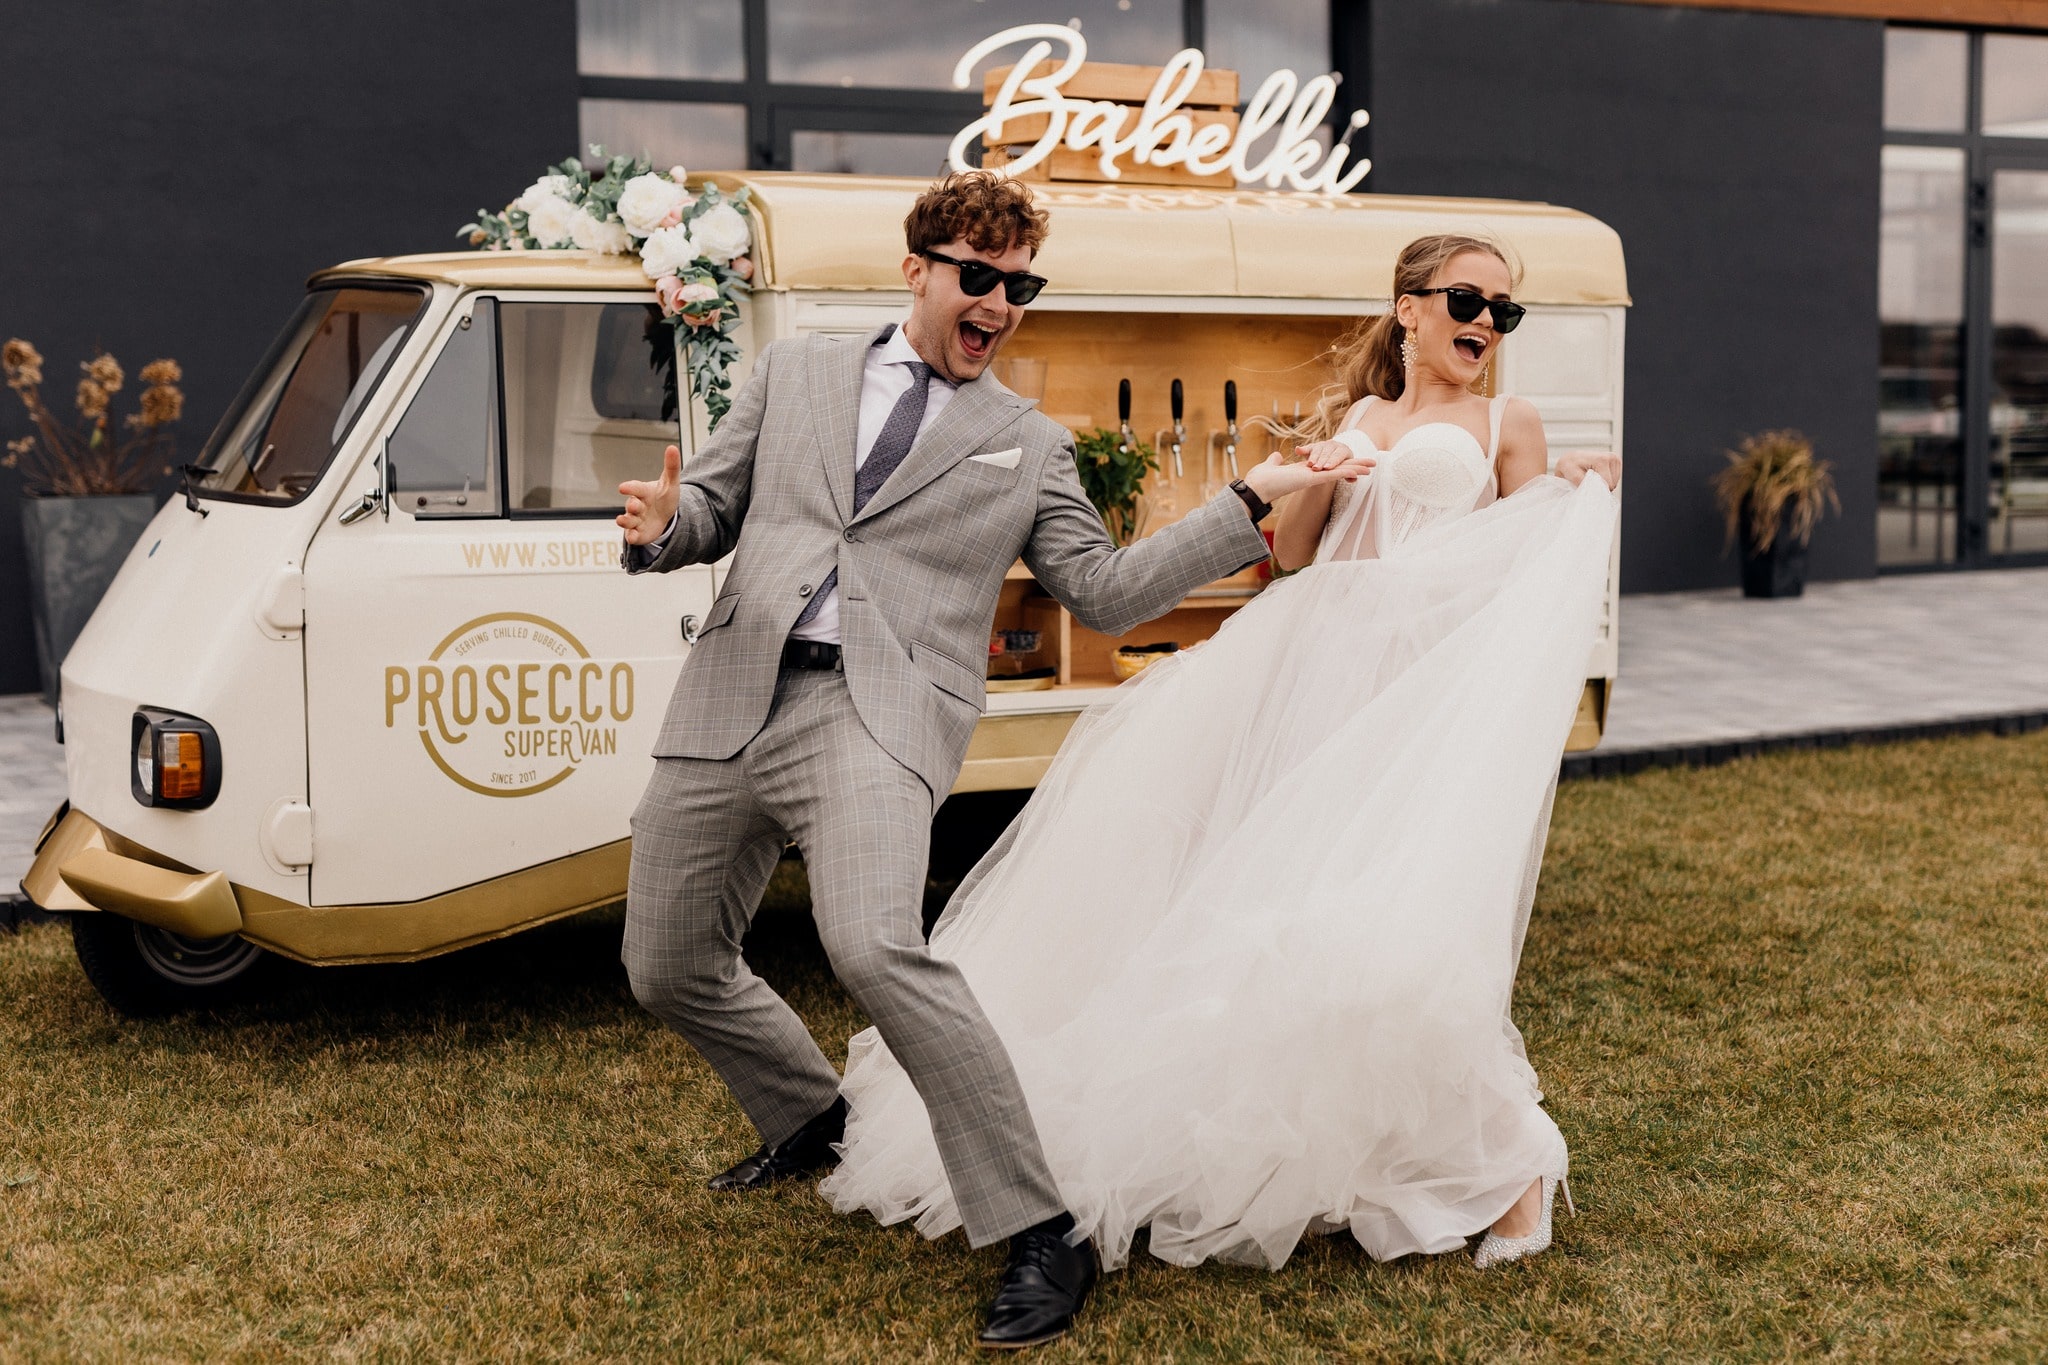 A wedding couole dancing in the garden in front of prosecco van